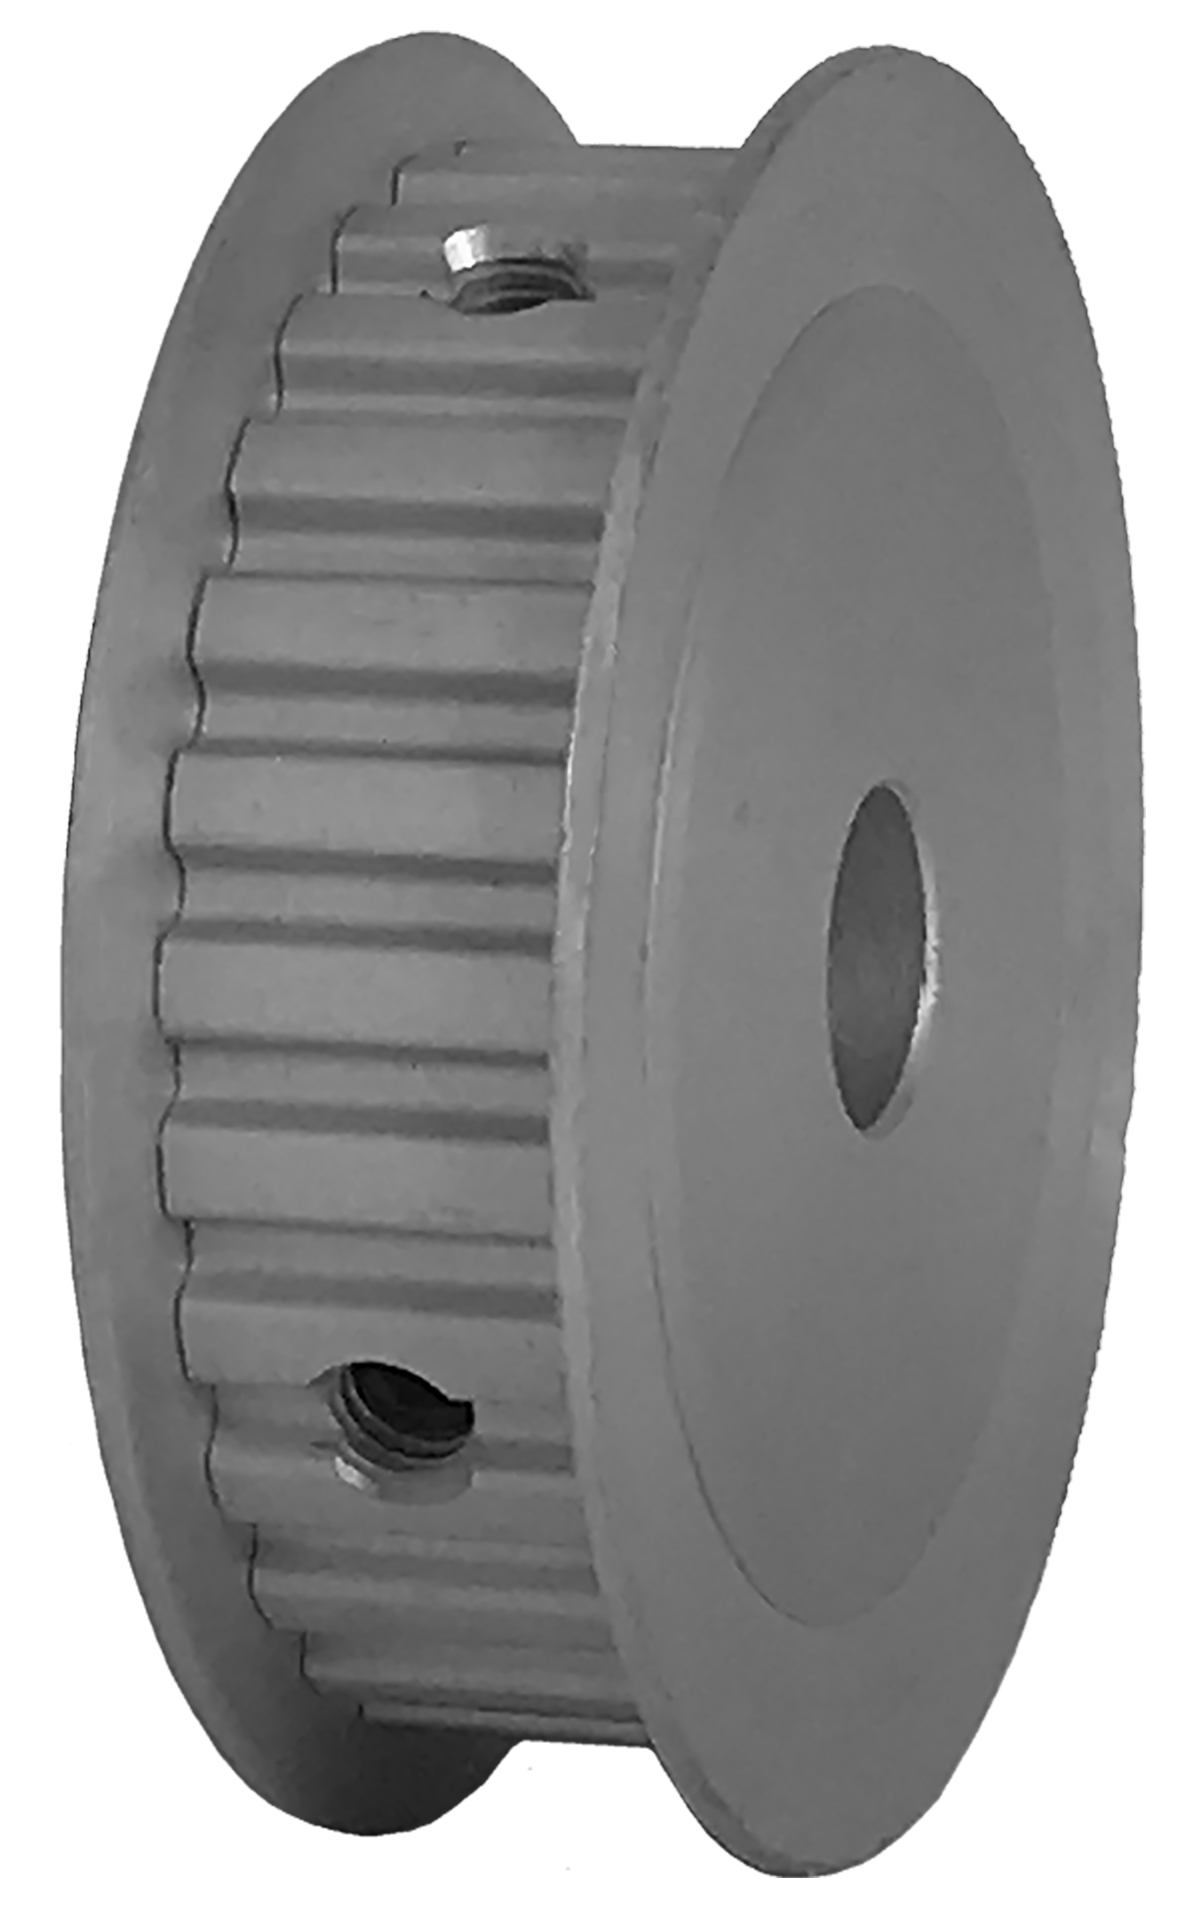 28XL037-3FA5 - Aluminum Imperial Pitch Pulleys